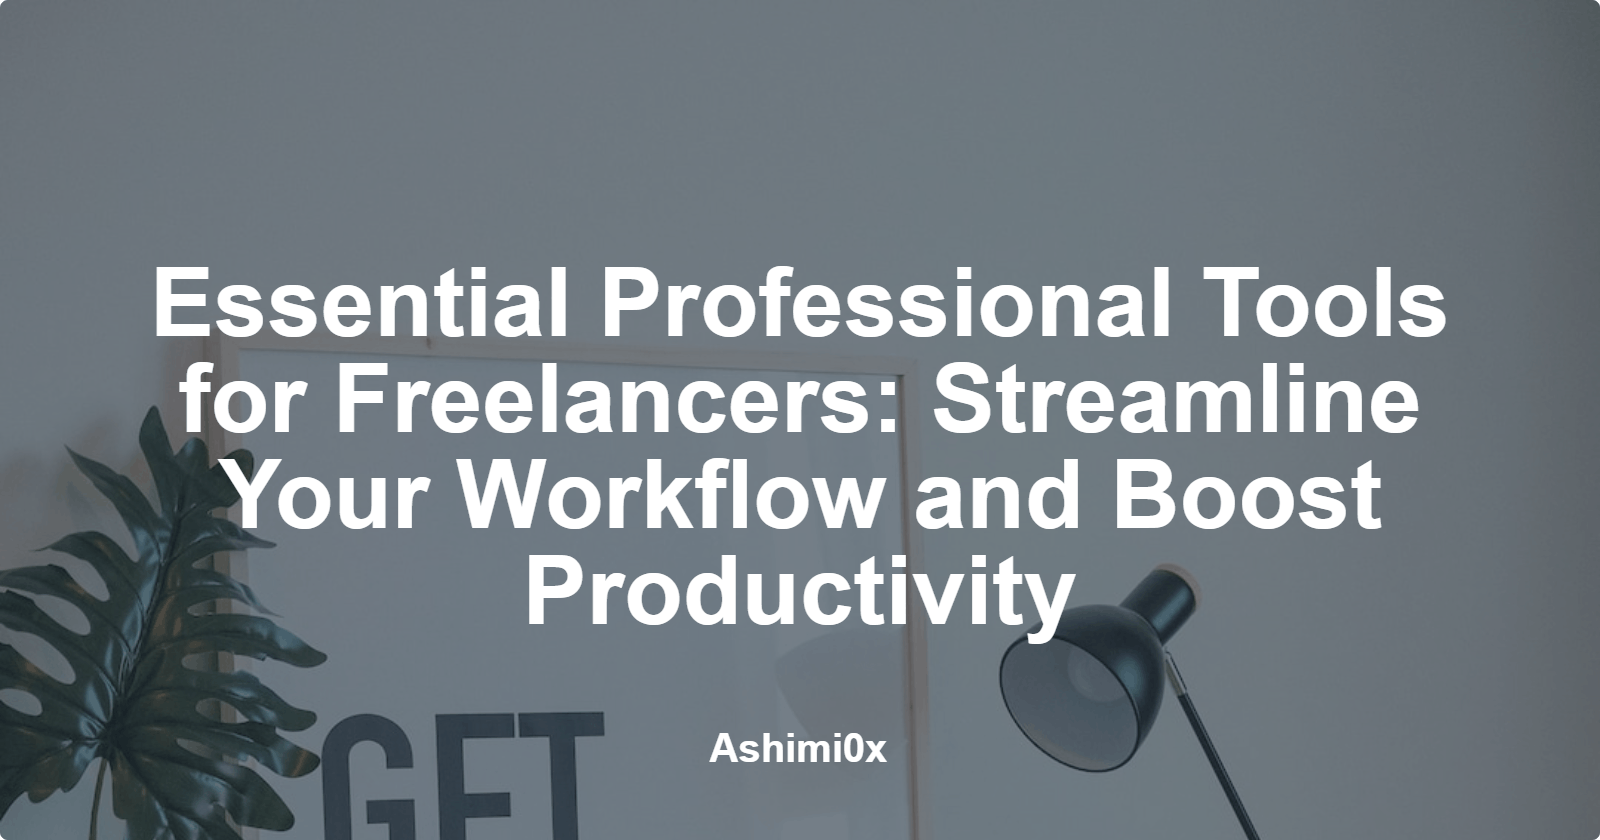 Essential Professional Tools for Freelancers: Streamline Your Workflow and Boost Productivity